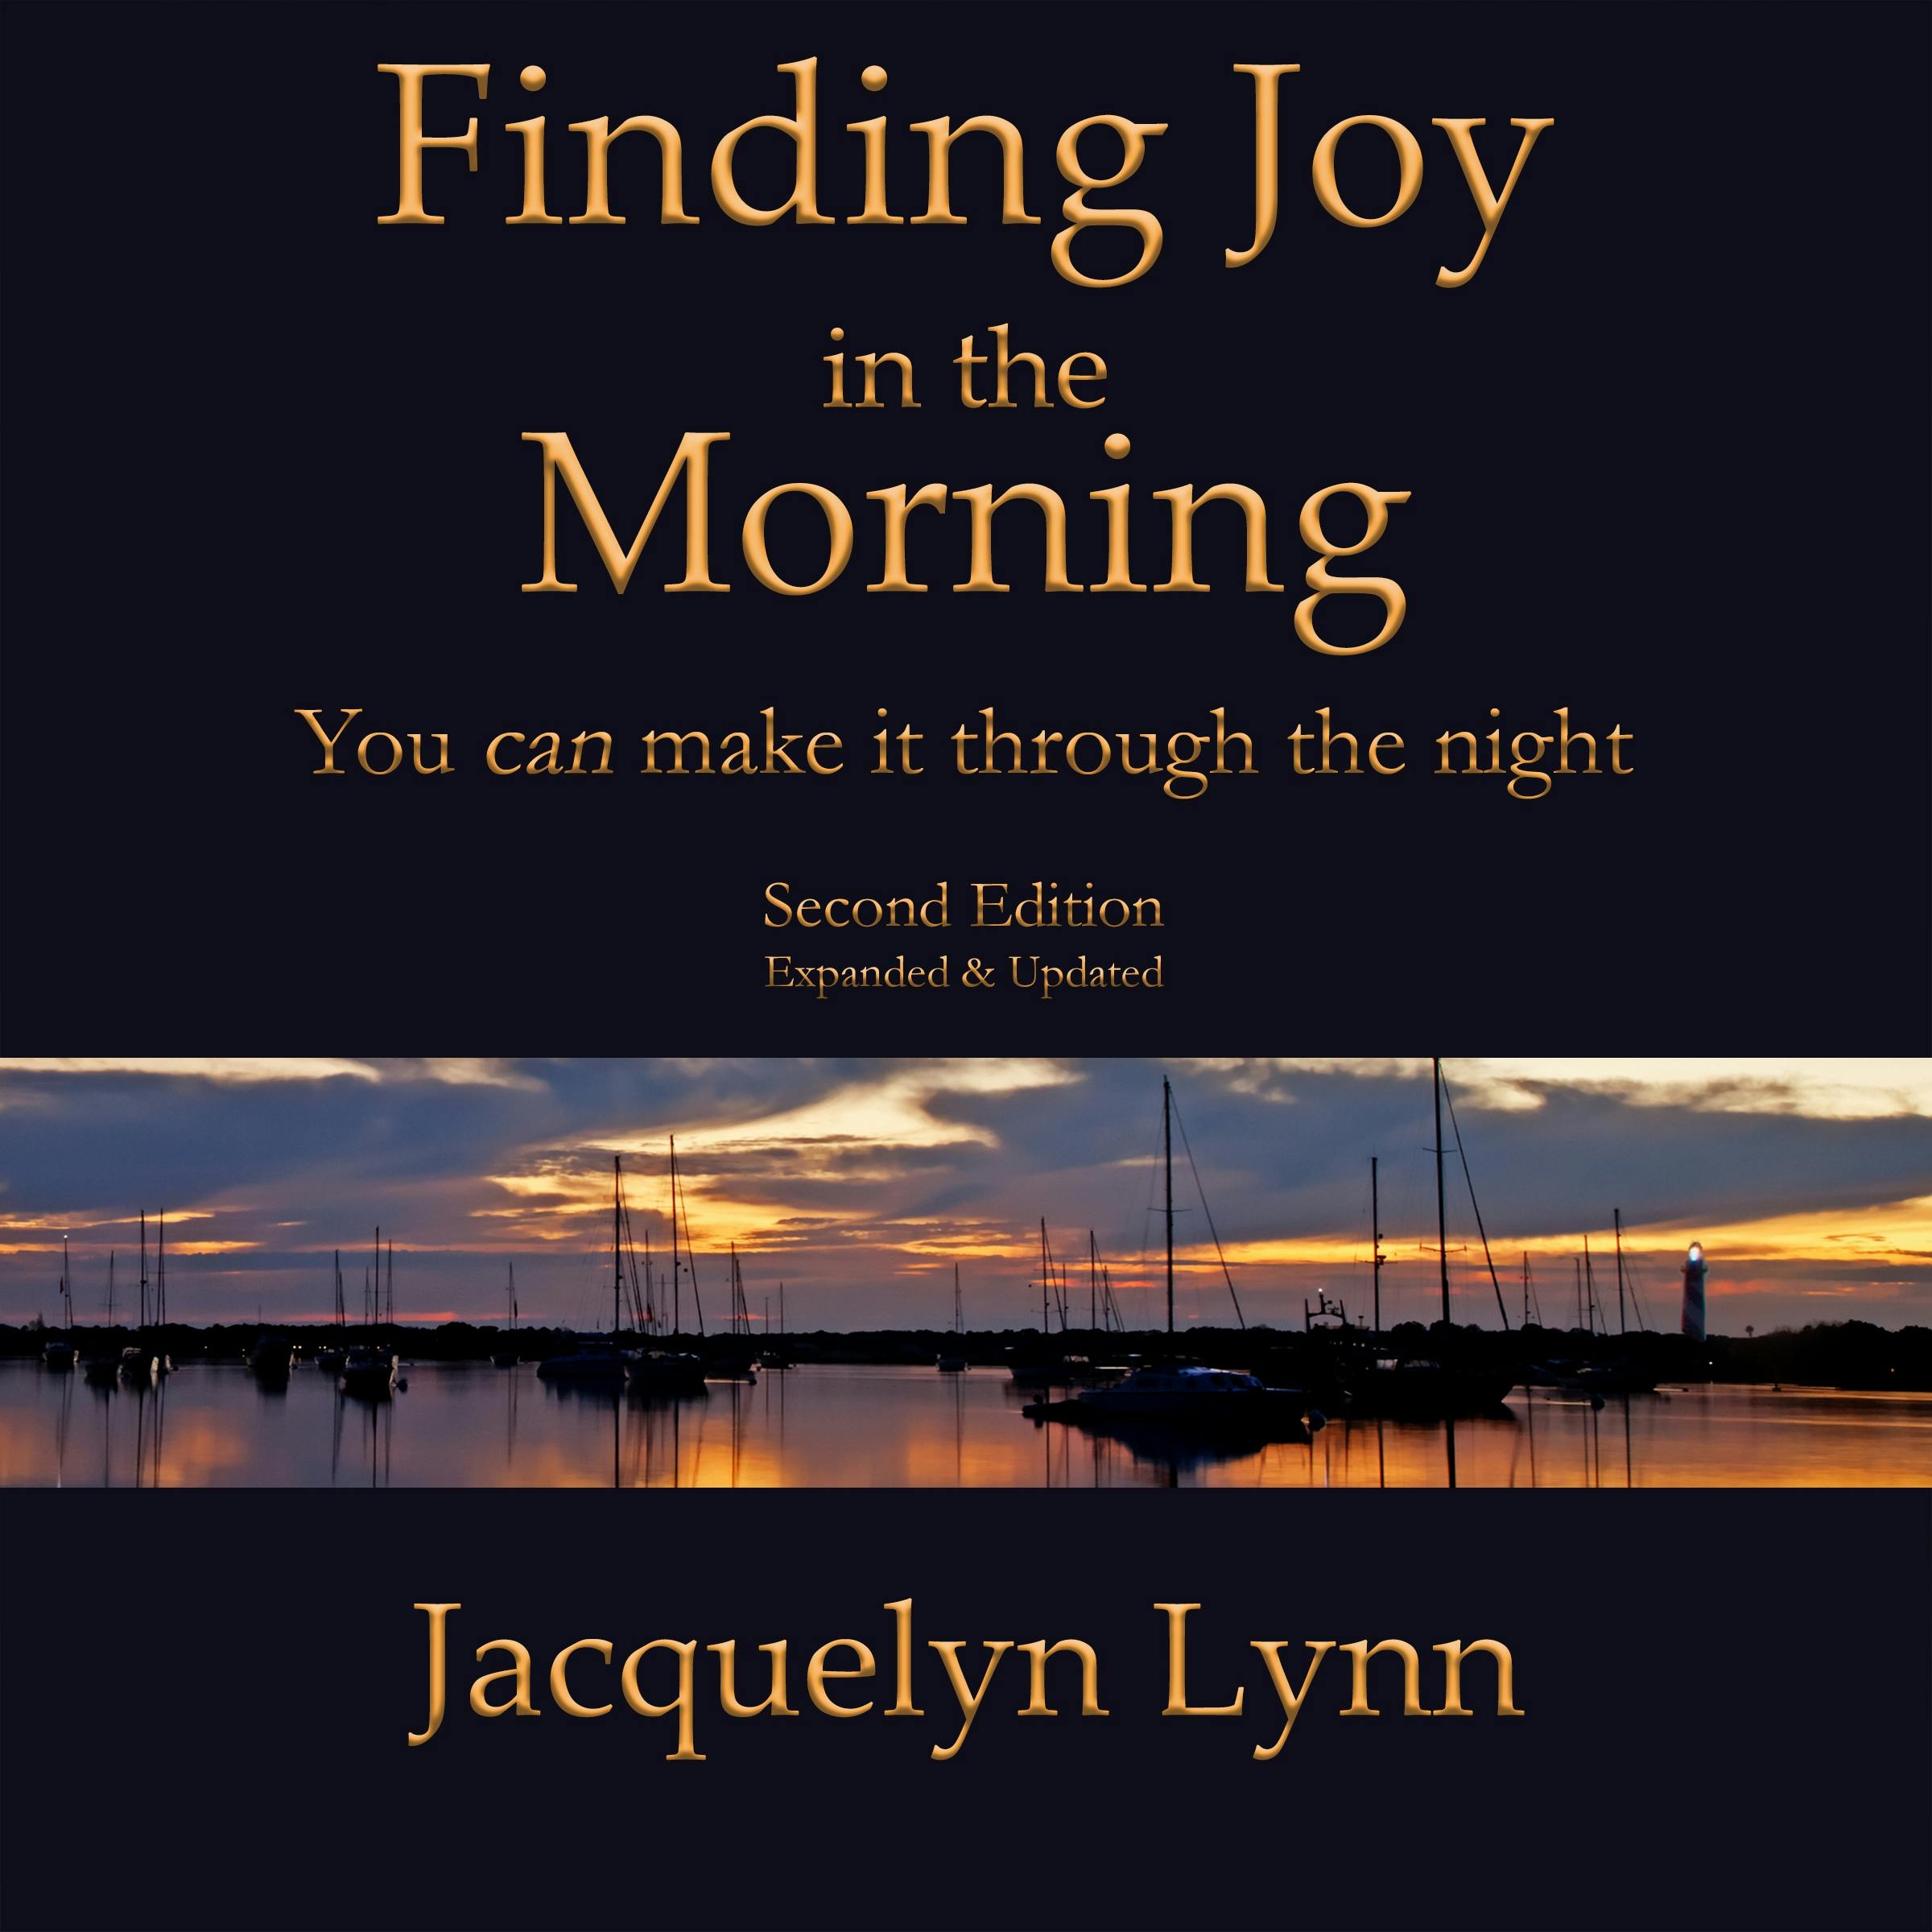 Finding Joy in the Morning: You can make it through the night - Jacquelyn Lynn